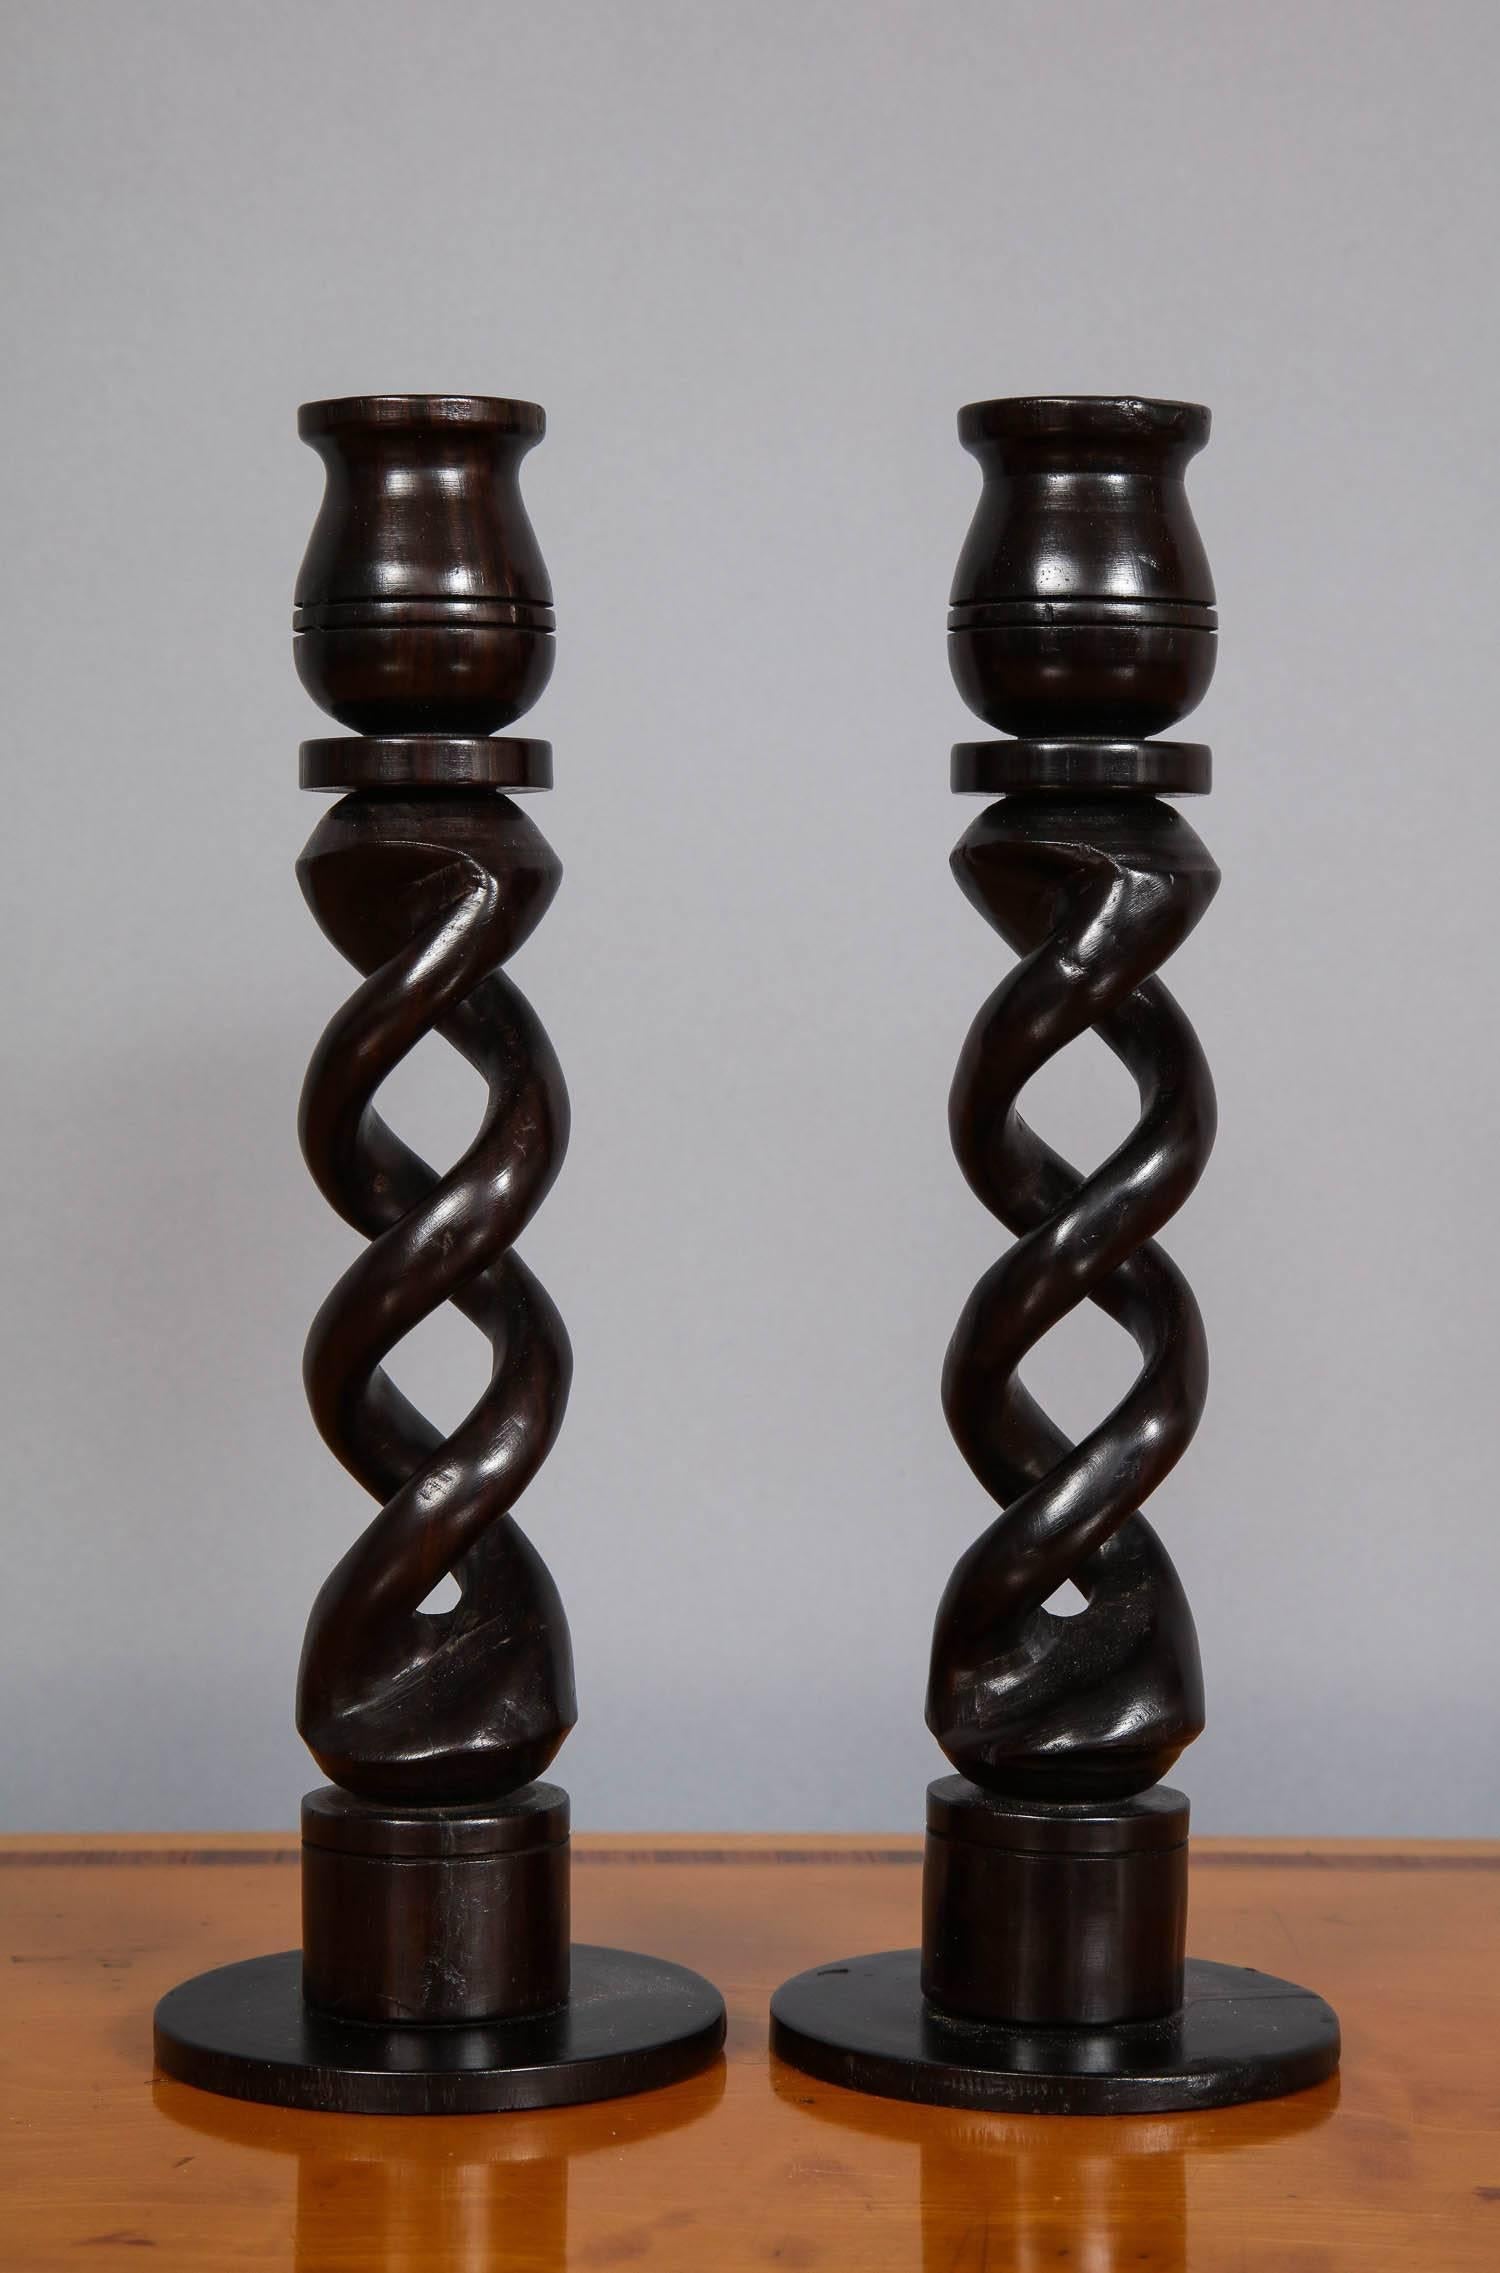 Good pair of Indian turned ebony candlesticks with open work barley twist shafts.